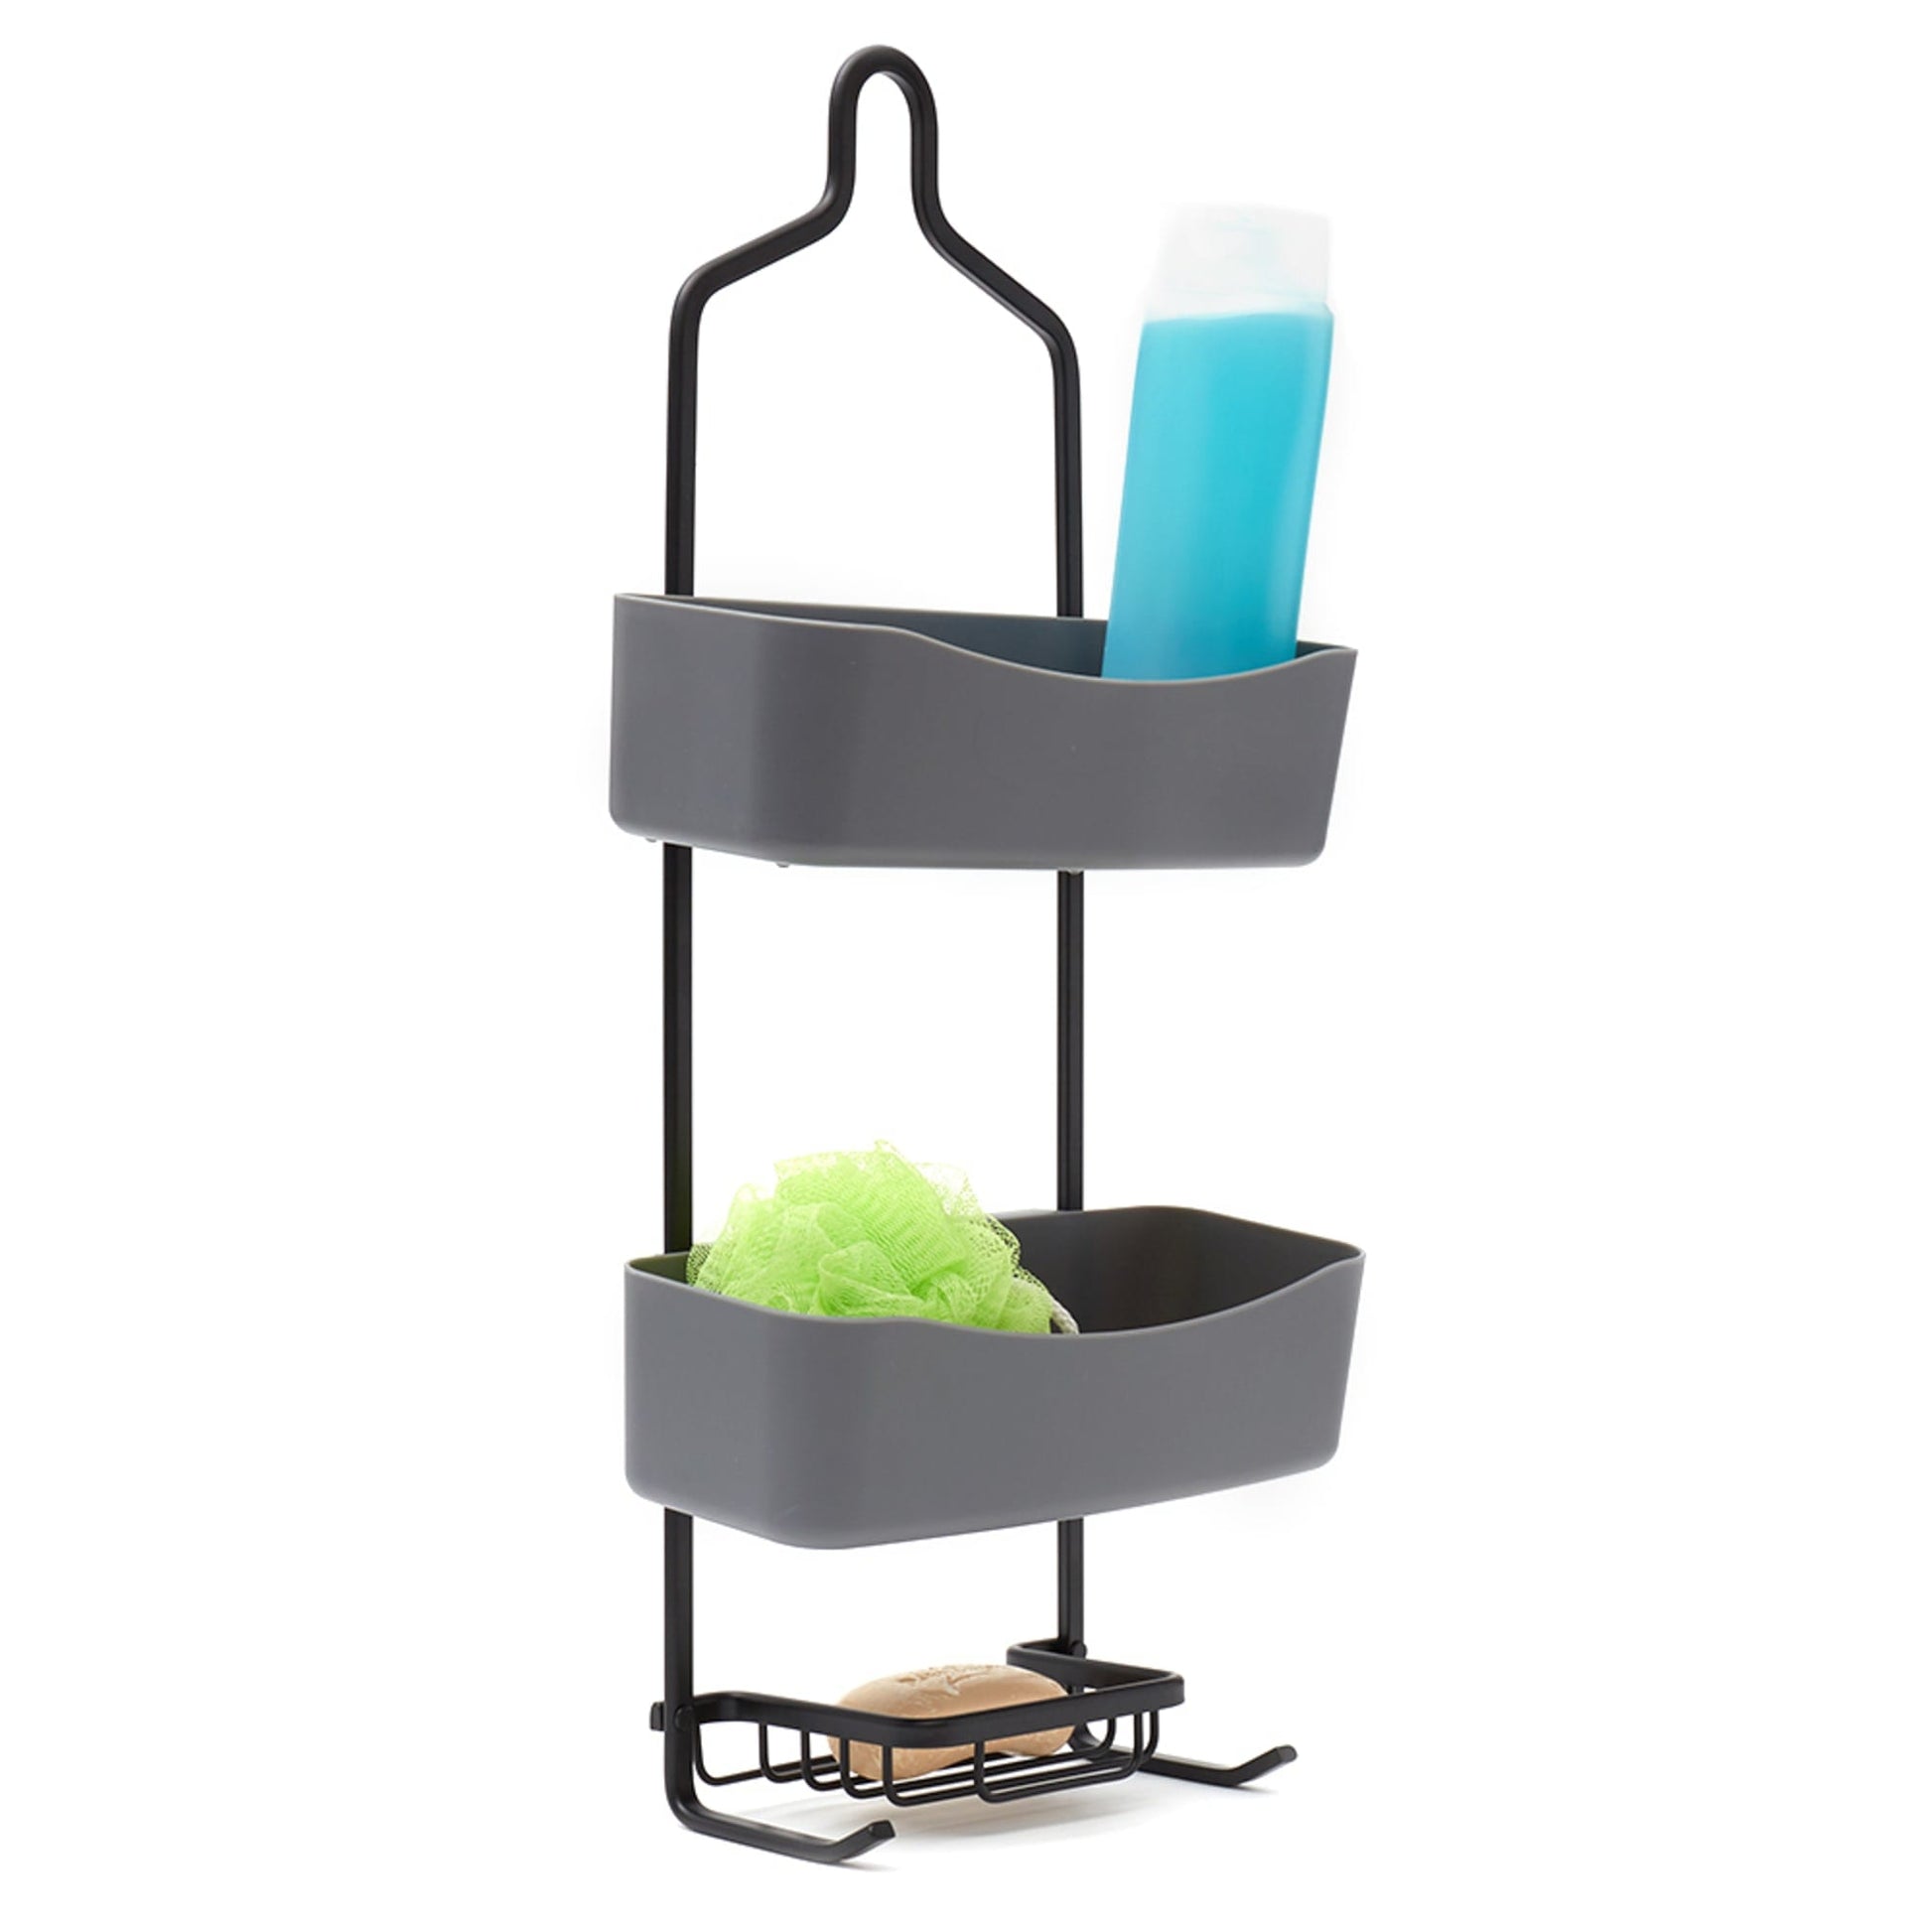 2 Tier Shower Caddy with Plastic Shelves, Grey, SHOWER